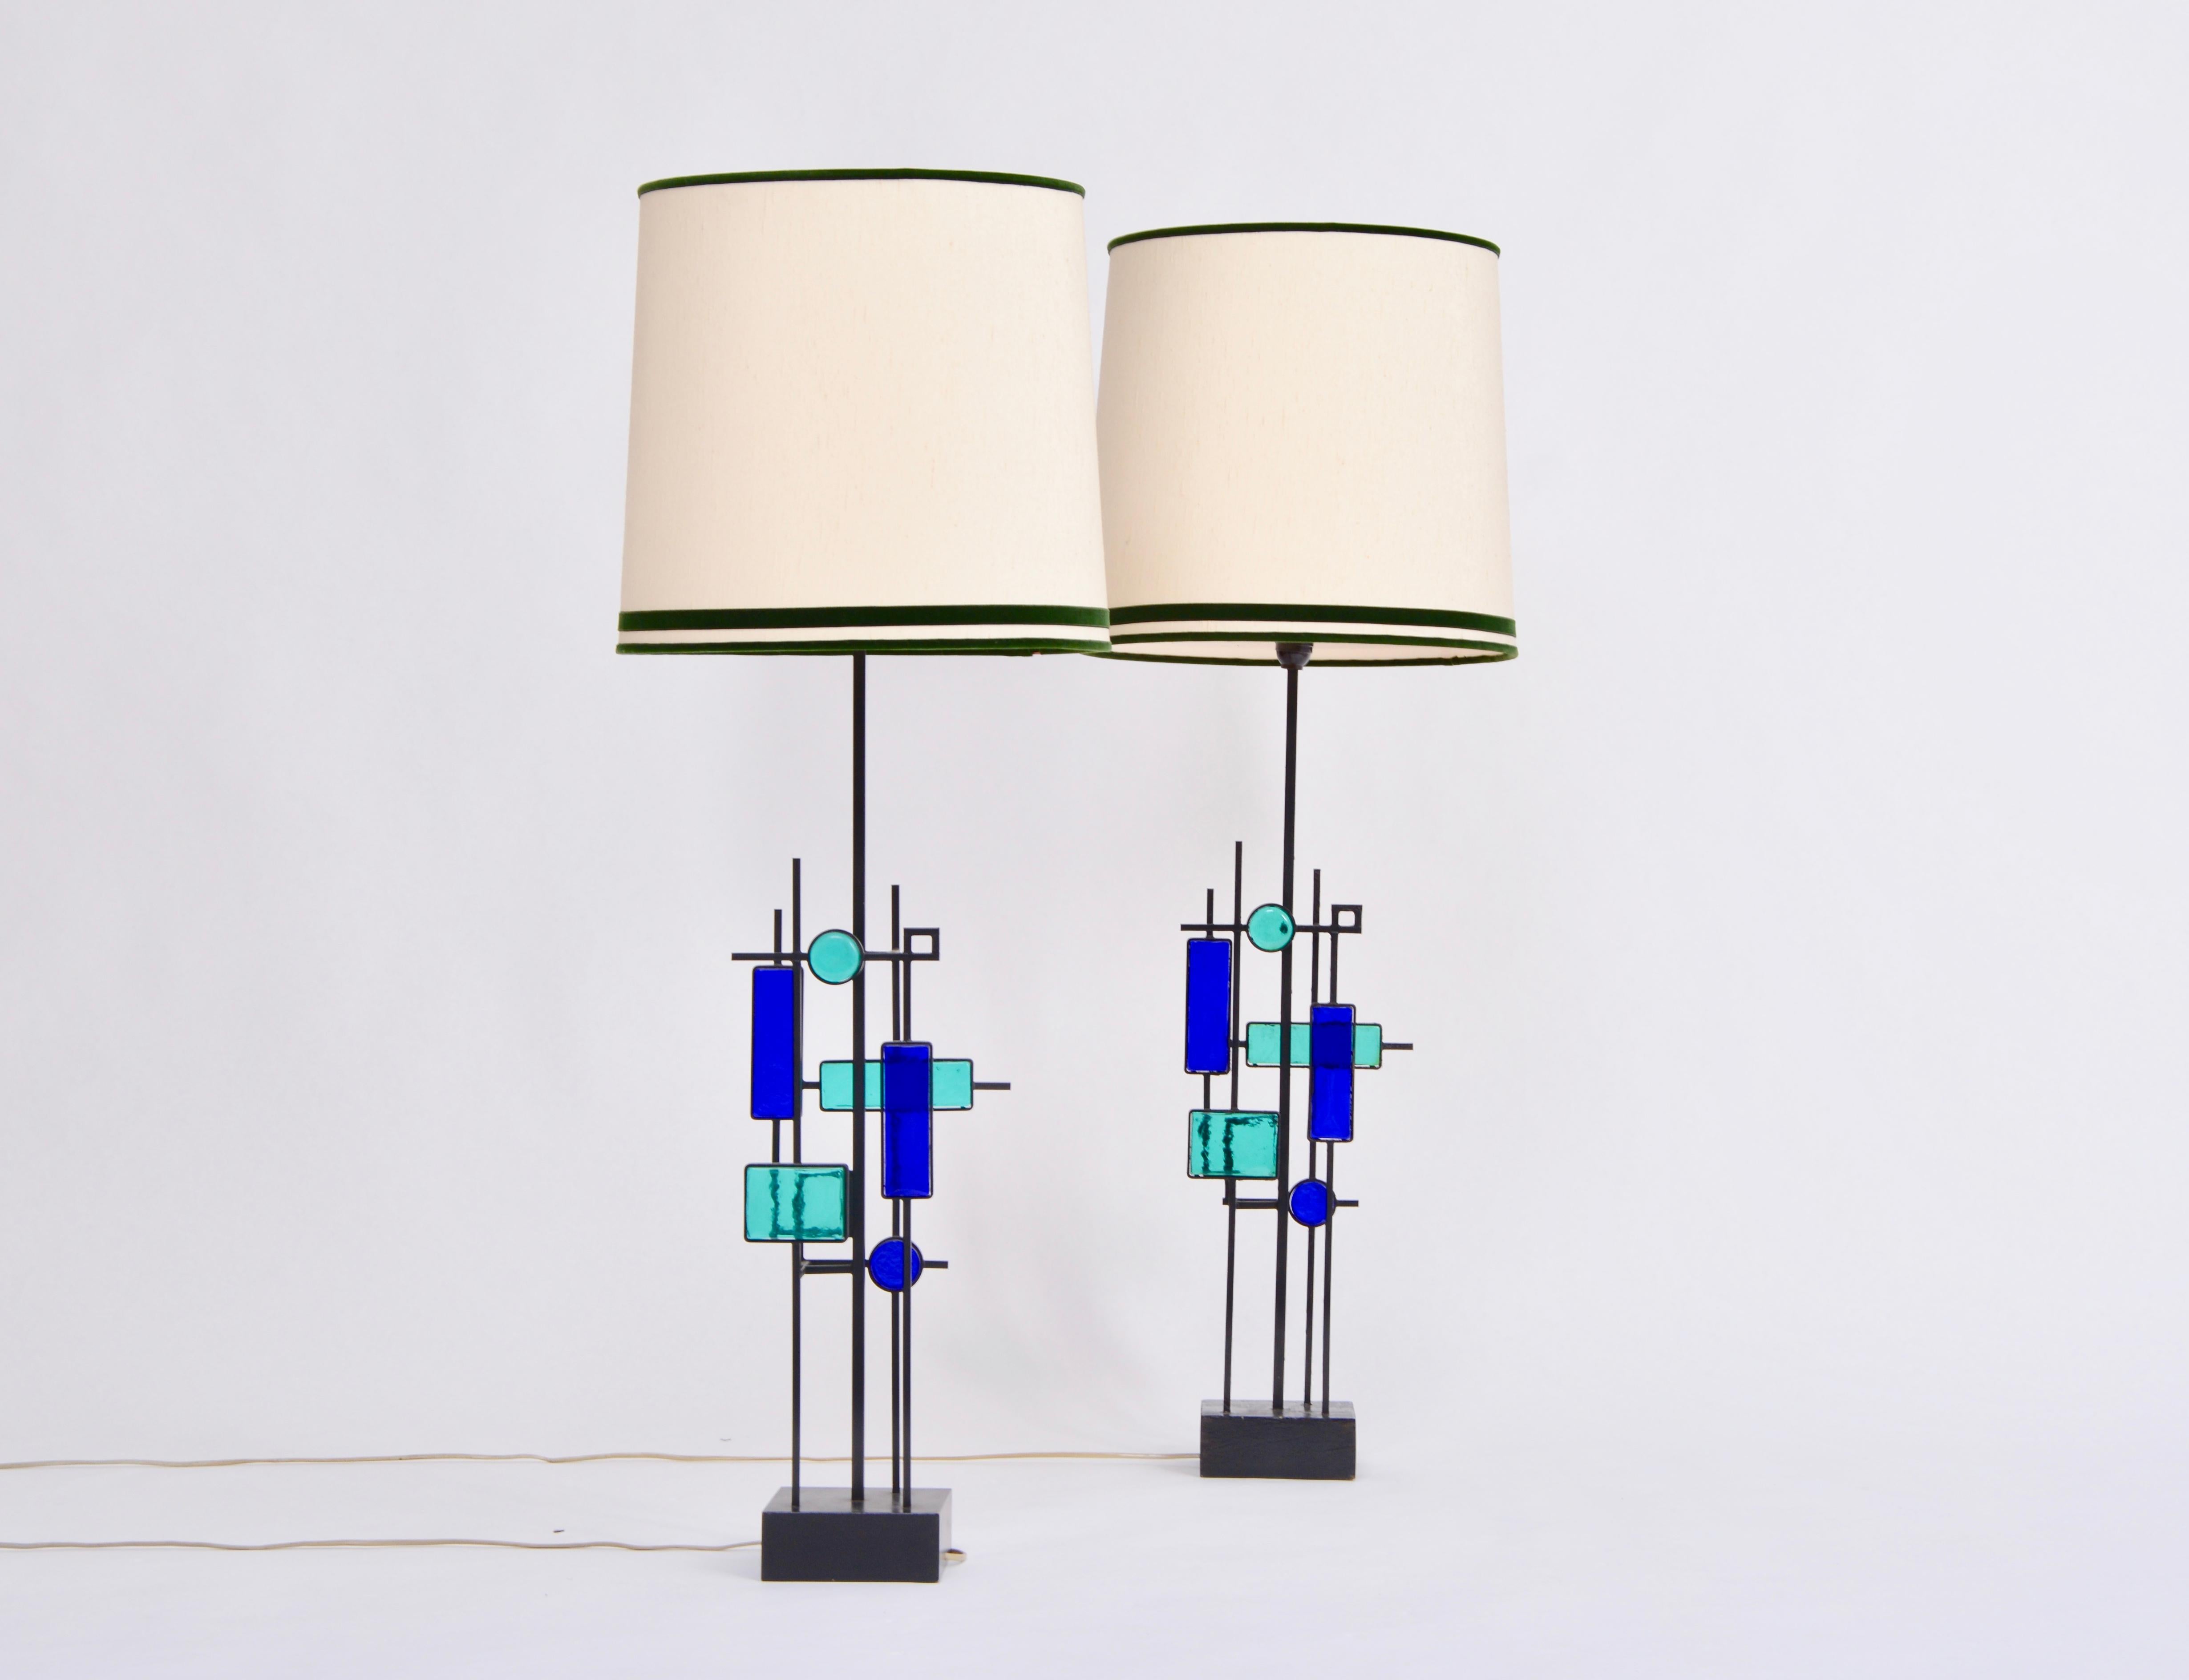 Pair of Tall Mid-Century Modern Iron and Glass Table Lamps by Svend Aage Holm Sorensen
Gorgeous pair of table lamps made of black lacquered iron and colored glass designed by Svend Aage Holm Sorensen and produced by Holm Sørensen & Co. in the